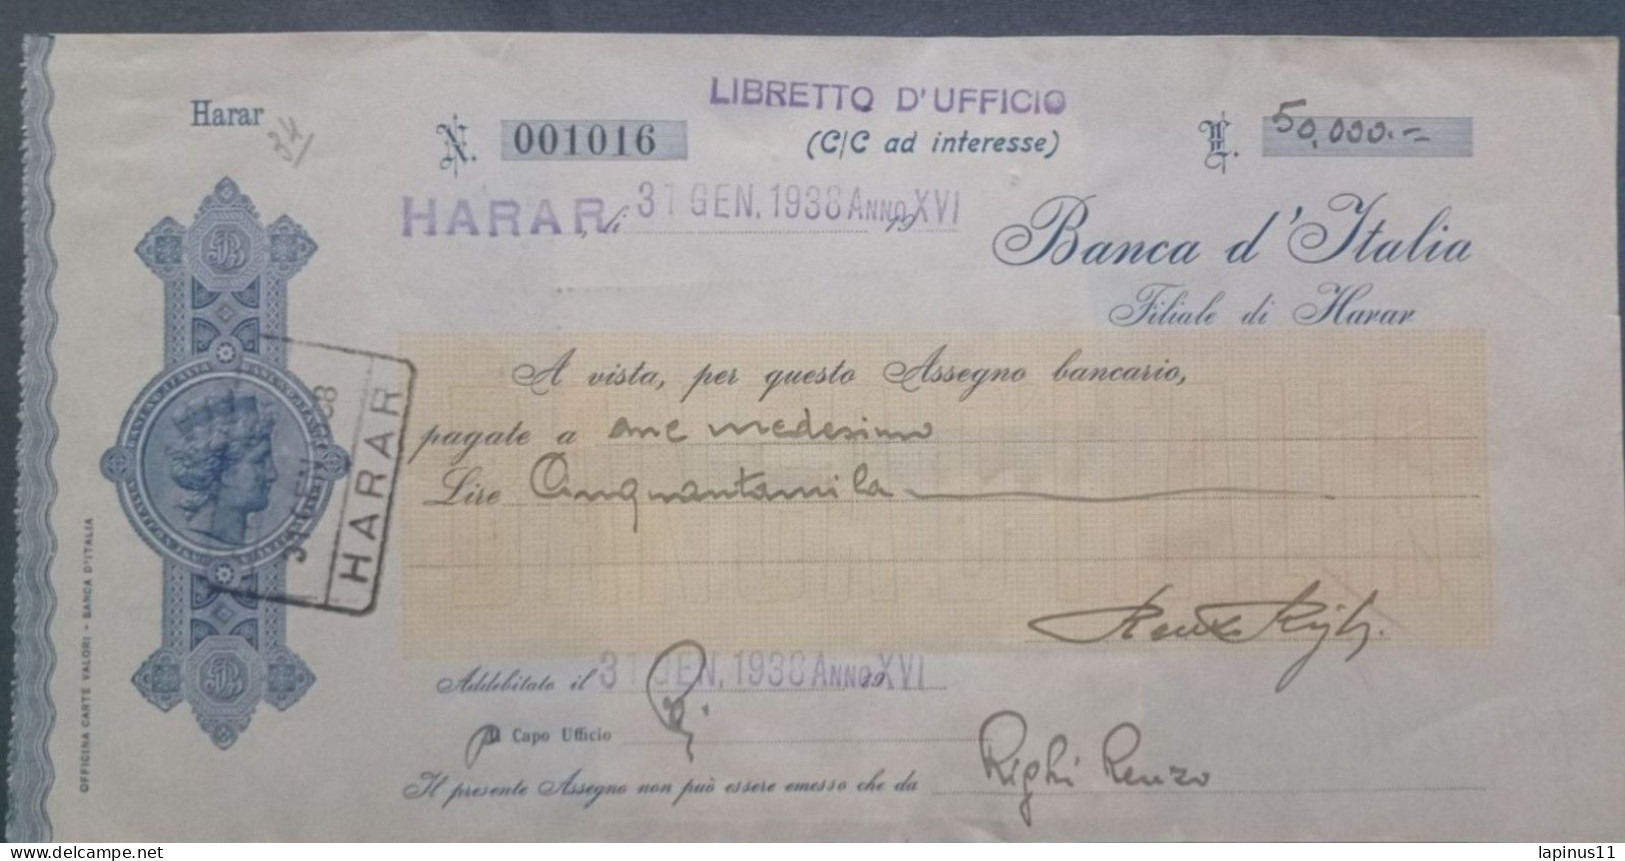 ETHIOPIA COLONIES BANK OF ITALY HARAR'S BRANCH 1938 CHECK 50,000 LIRE + 10 CENT TAX NO RED BUT ORANGE - Africa Orientale Italiana